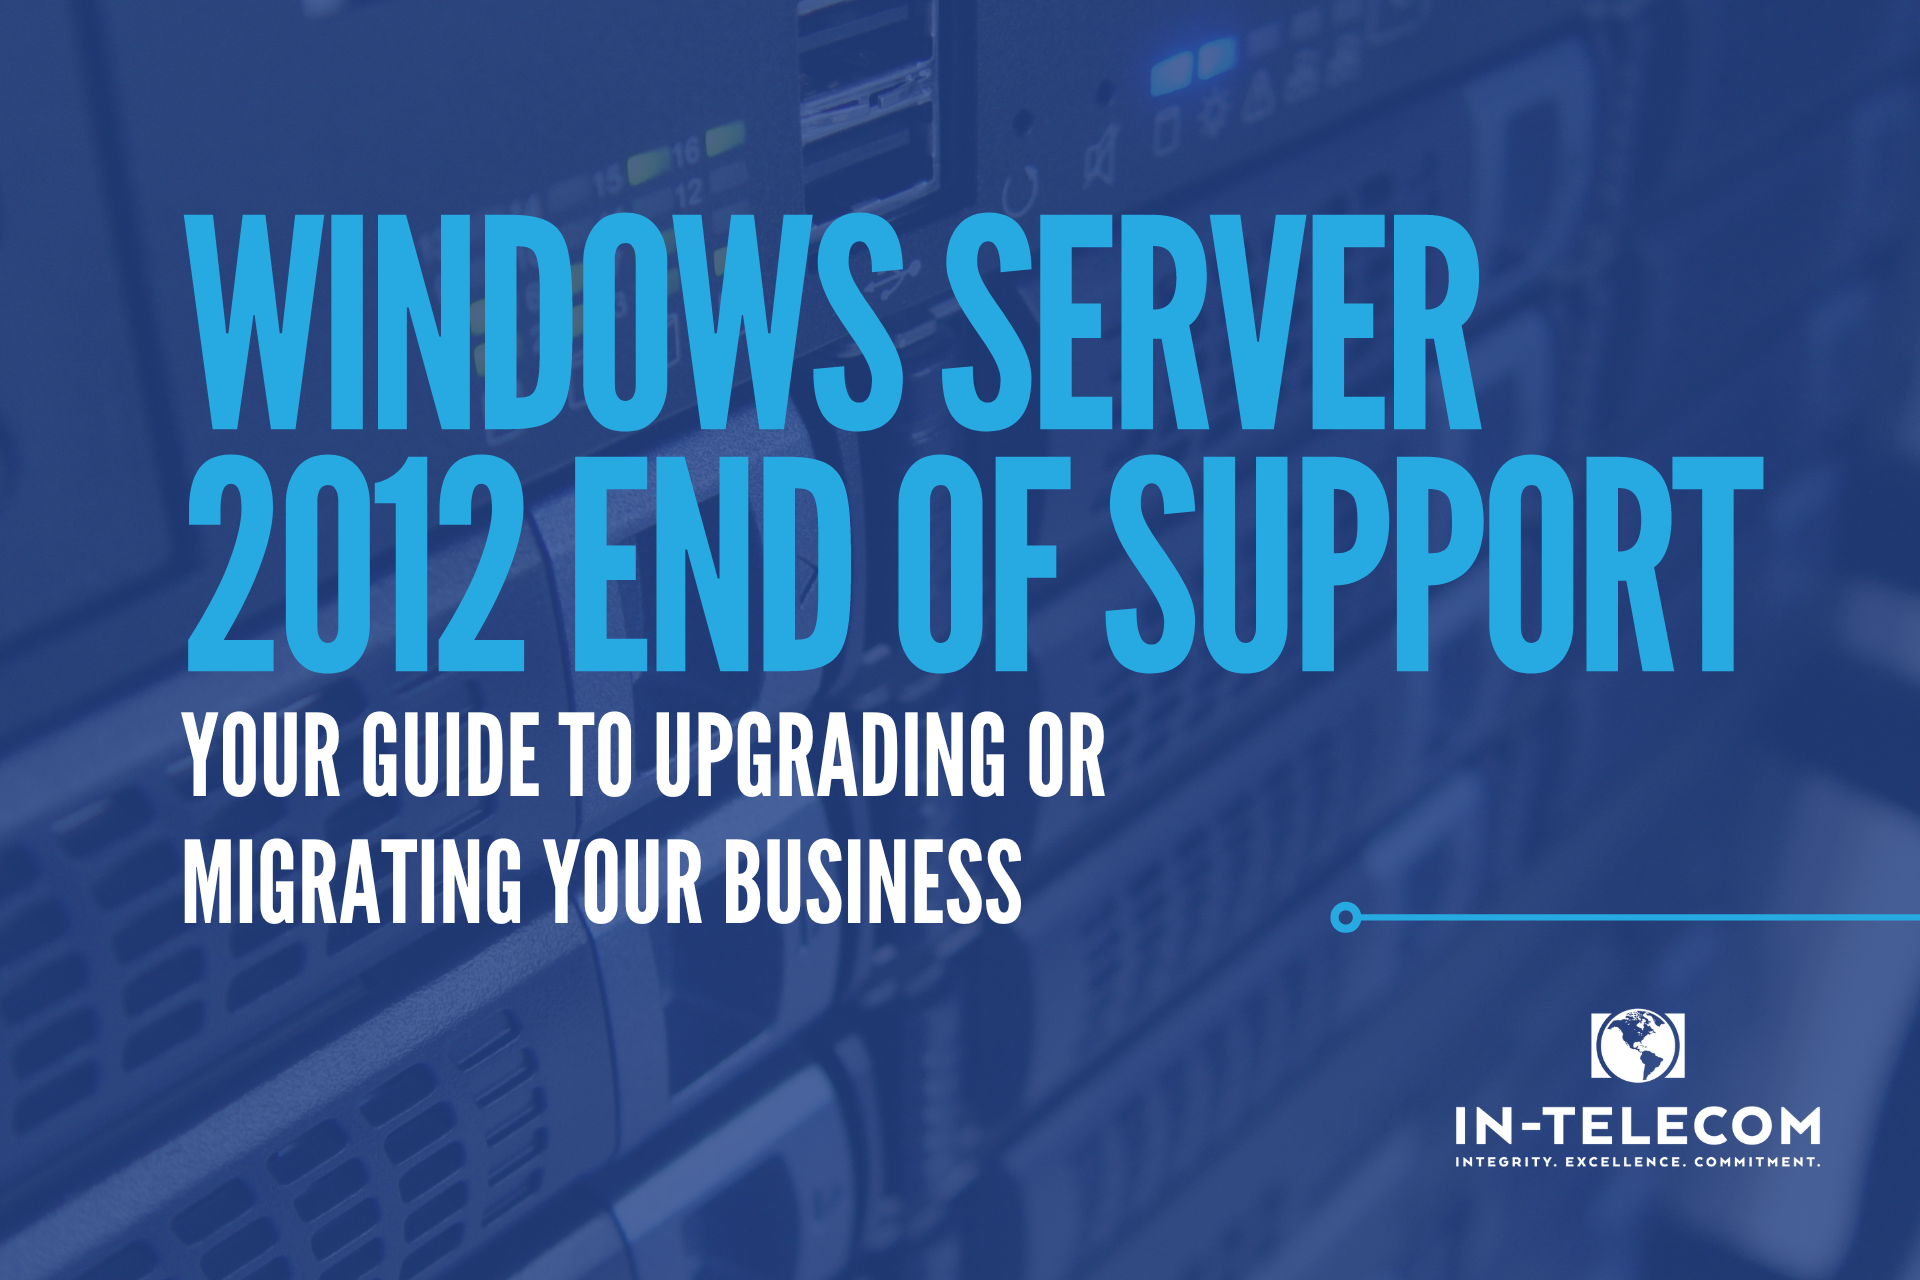 Image of a server with text saying "Windows Server 2012 End of Support"